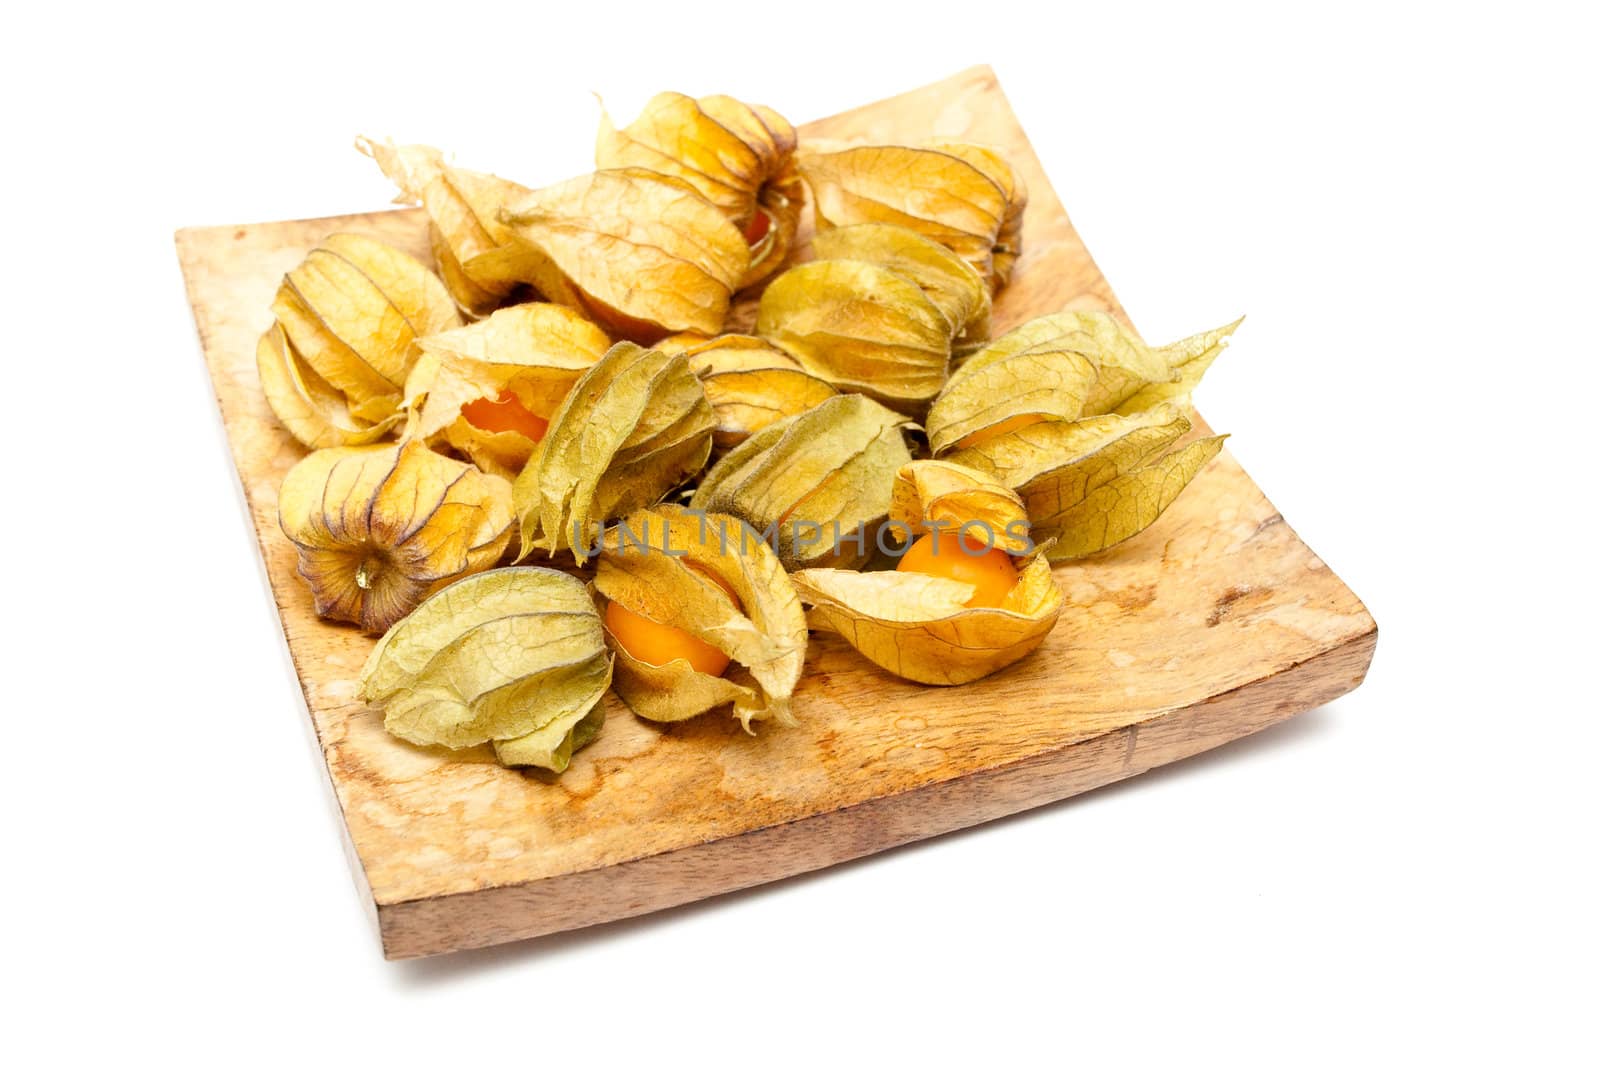 Physalis fruits on a wooden dish on white background